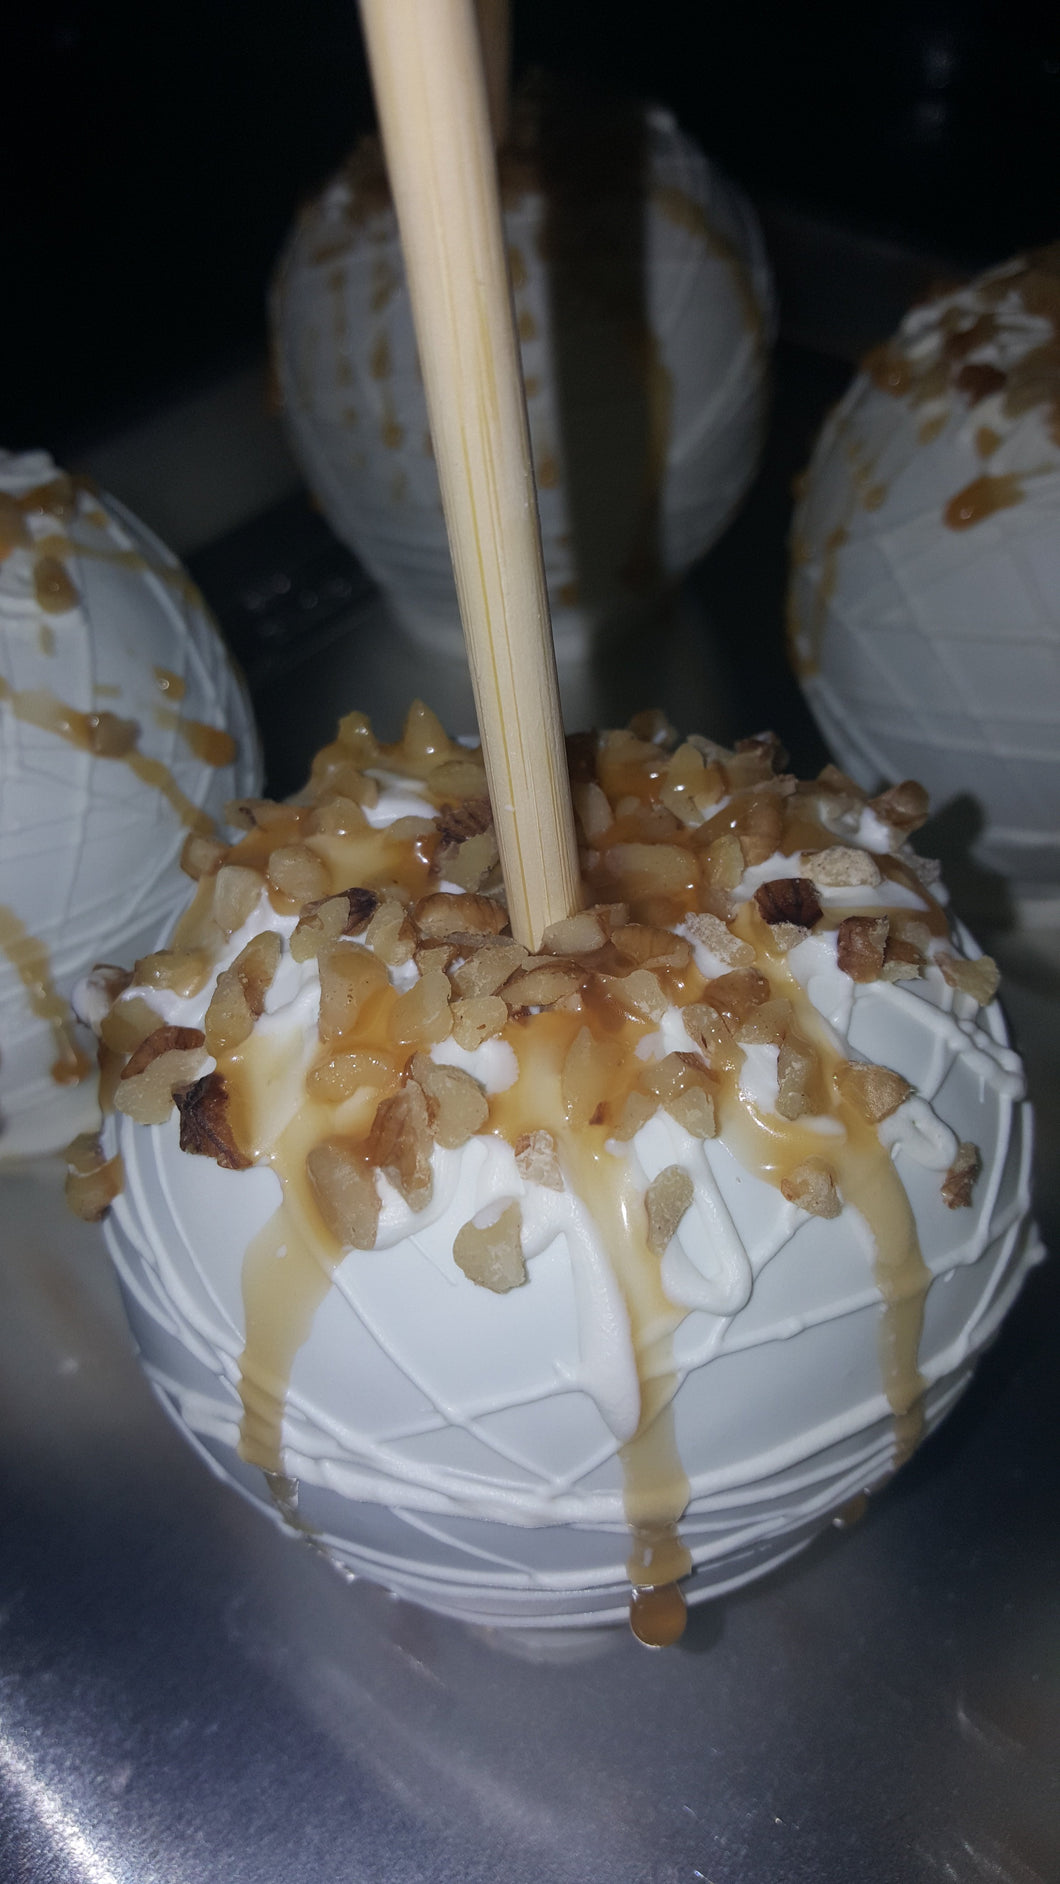 Apples - Chocolate Covered/Dipped (White, Caramel & Chopped Walnuts)